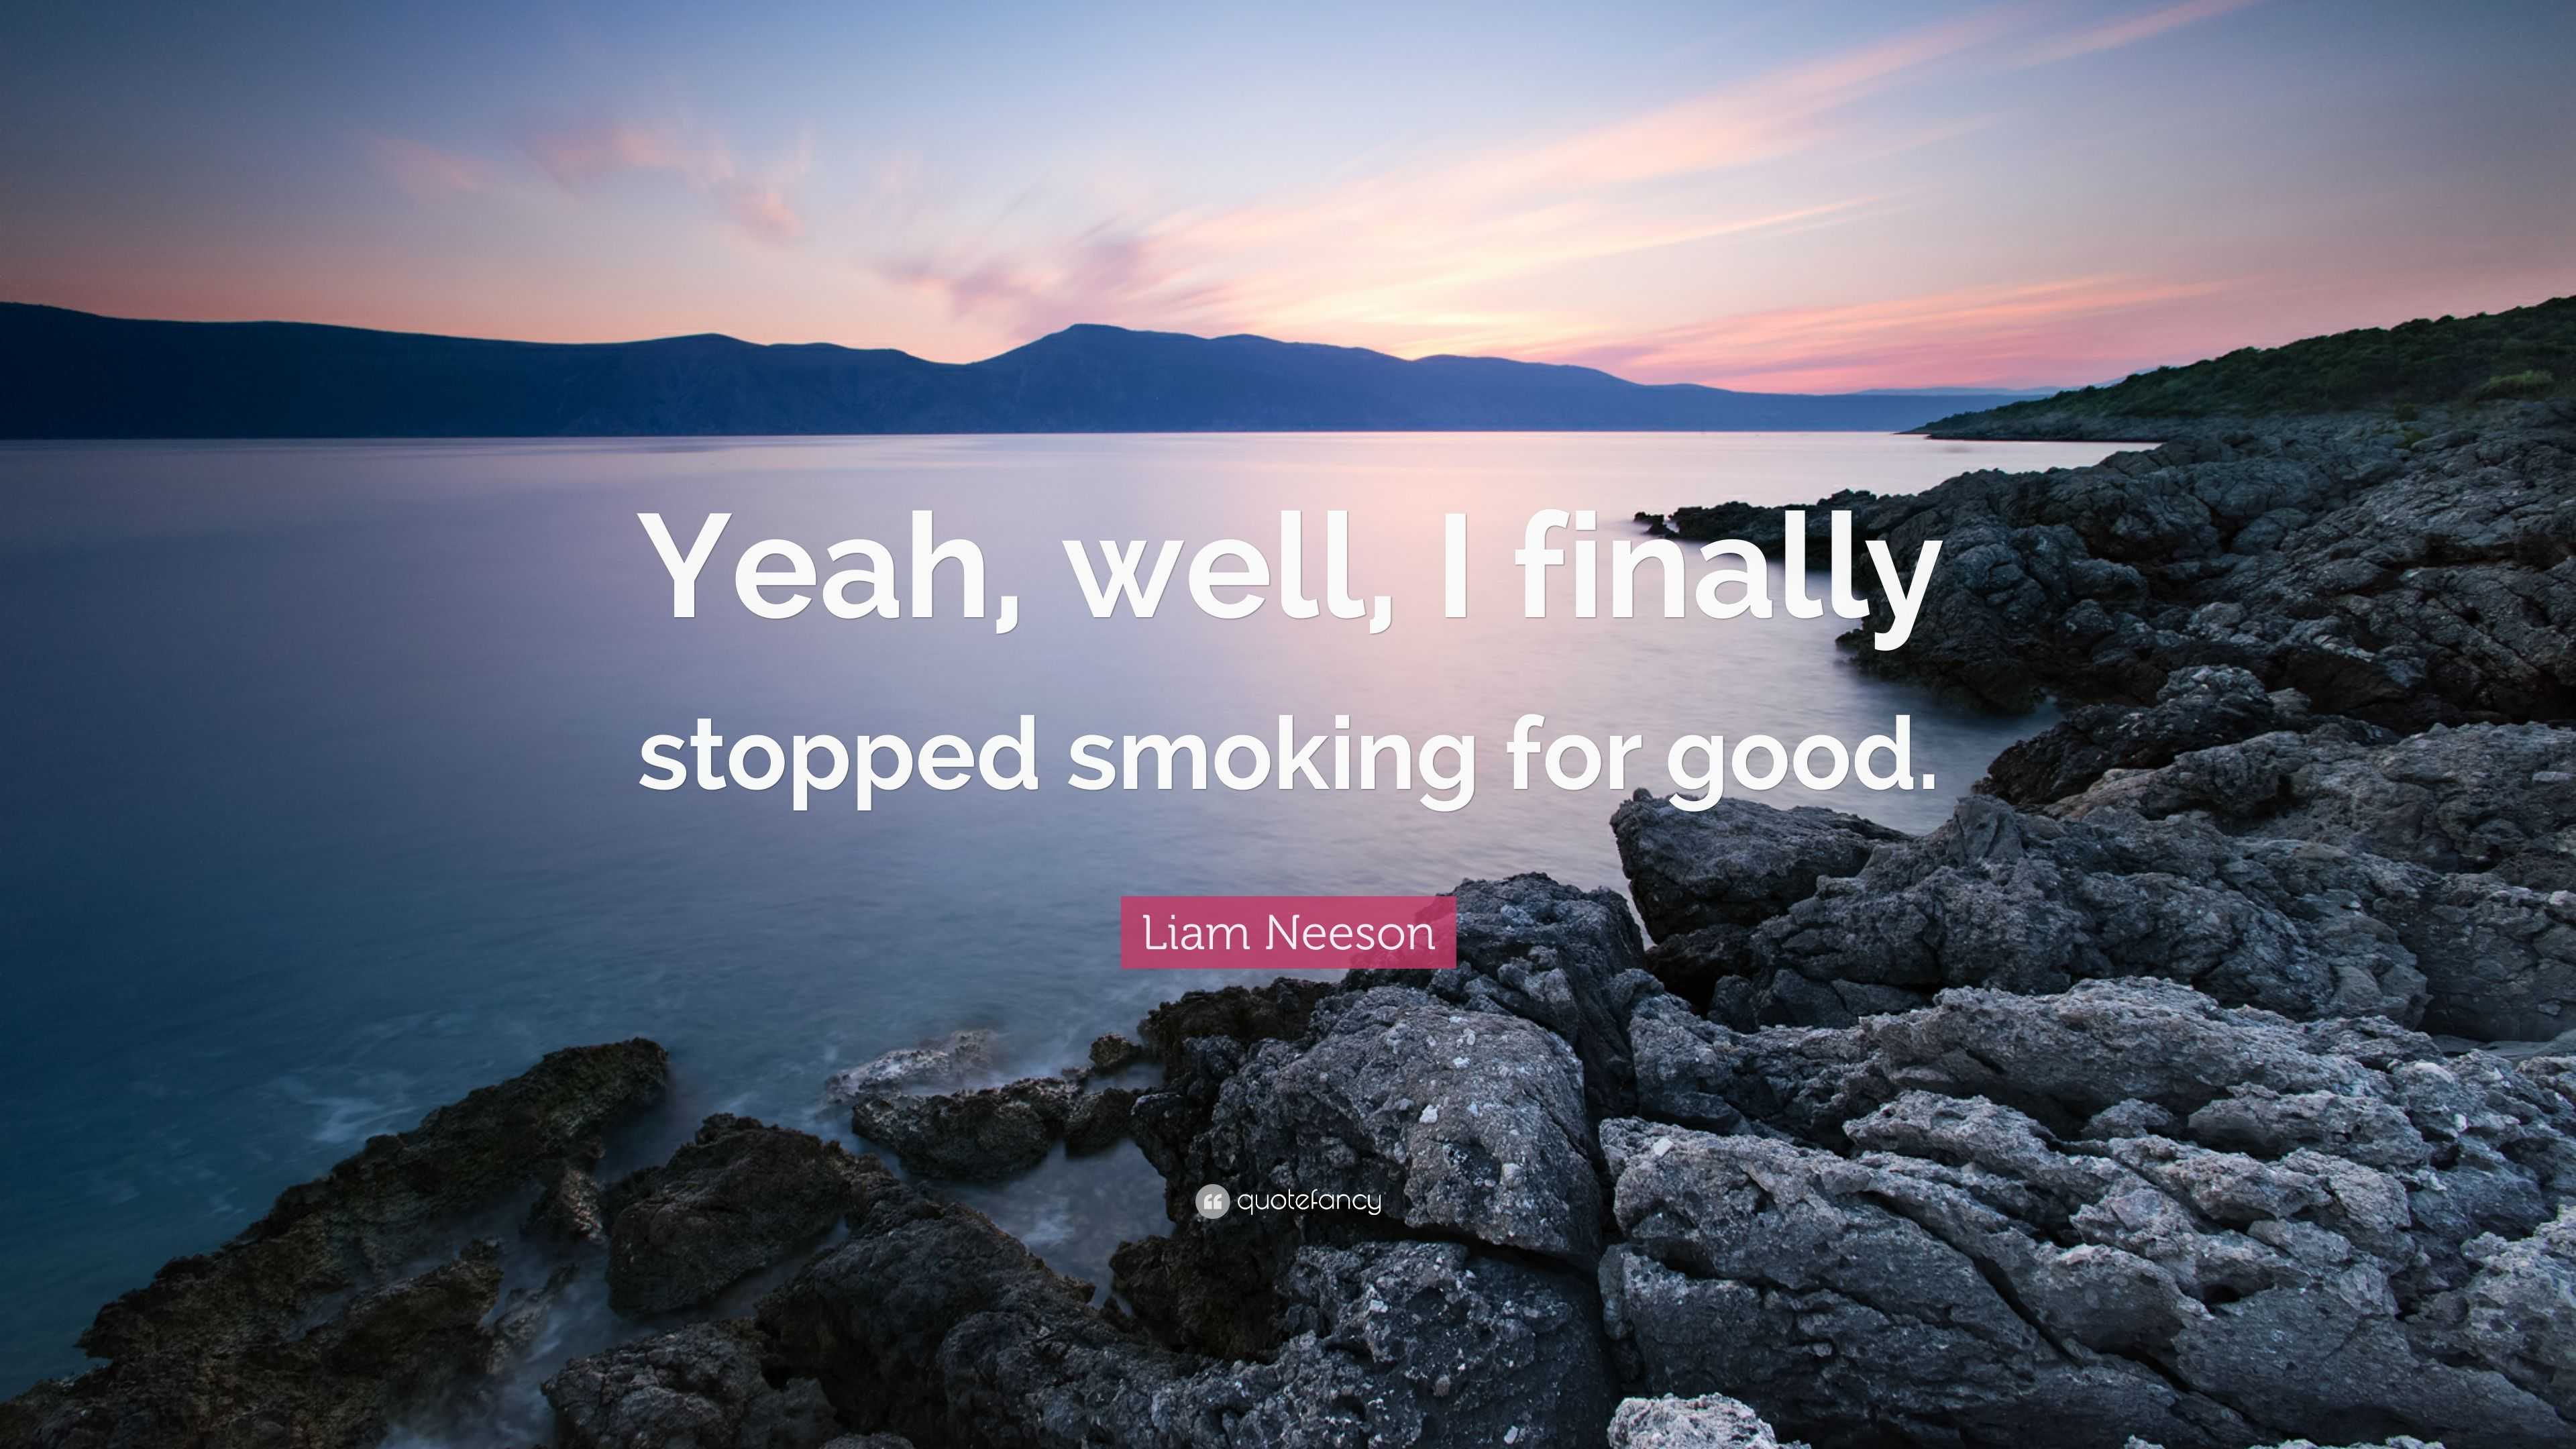 good quotes about smoking